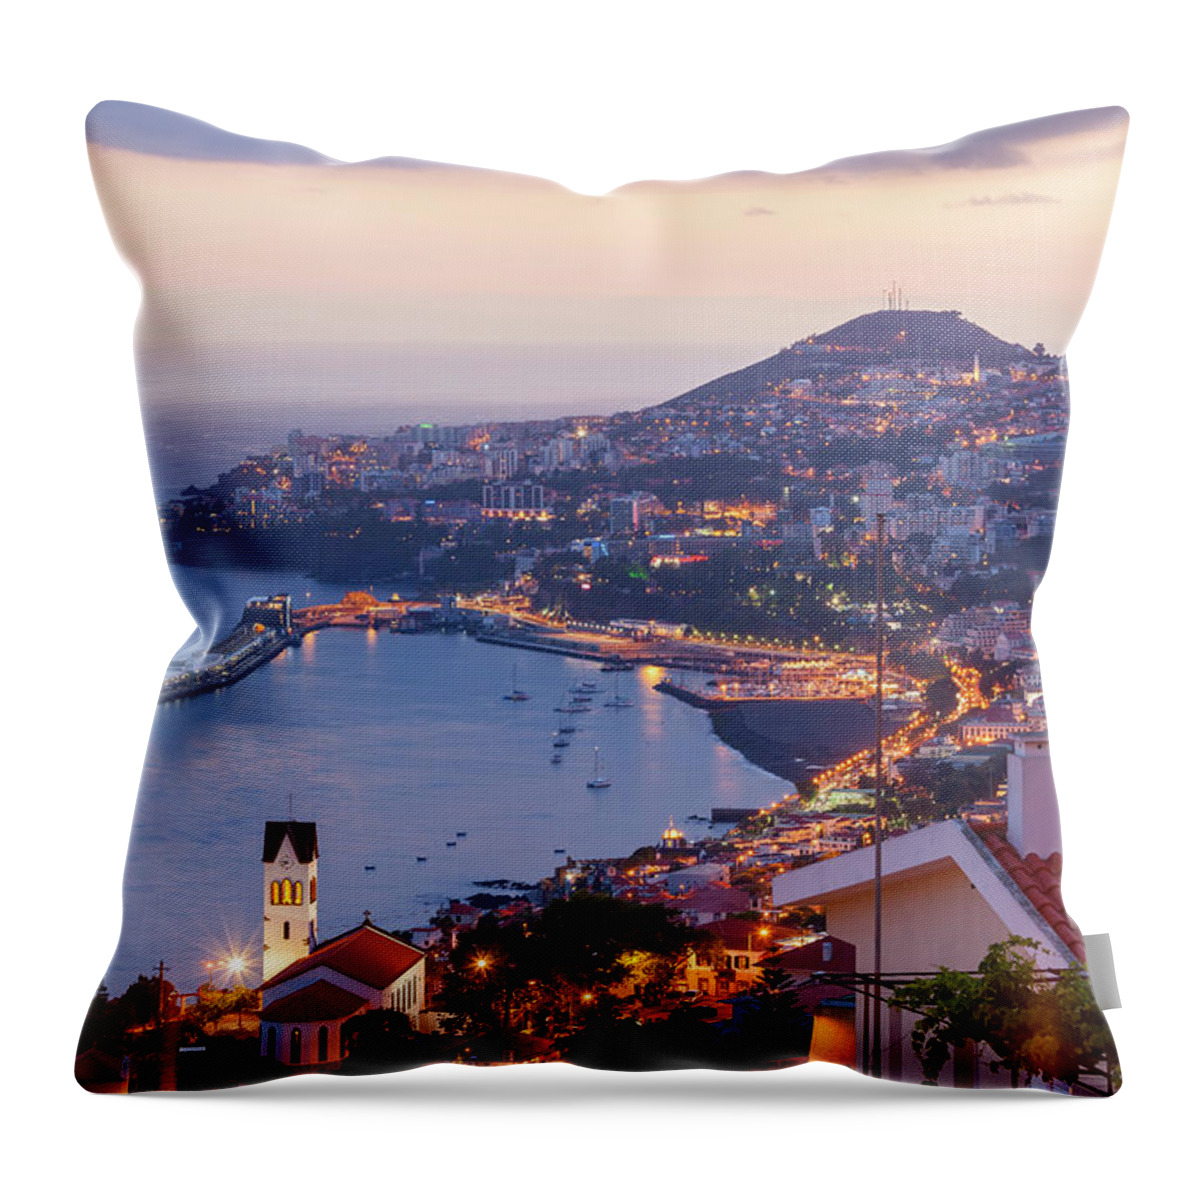 Town Throw Pillow featuring the photograph View Over Funchal At Dusk, Madeira by Peter Adams